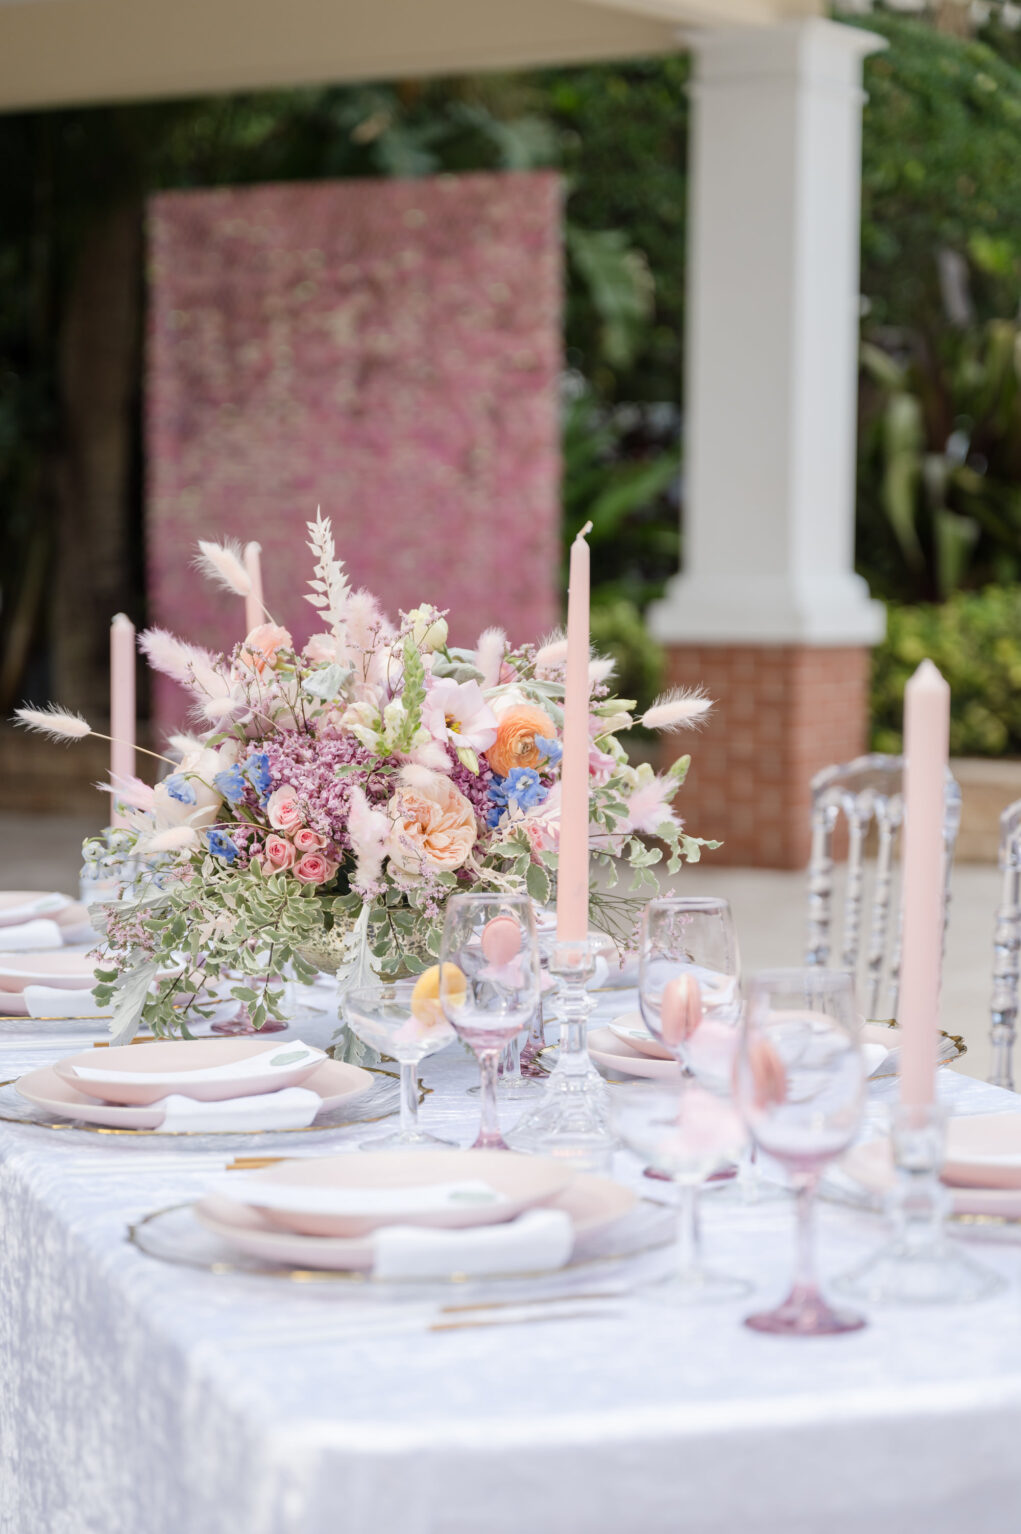 Spring Garden Purple, Orange and Pink Roses, Blue Stock Flowers, and Greenery Centerpieces | Gold Flatware with Gold-rimmed Chargers and Blush Plate | Whimsical Garden Wedding Reception Inspiration | Sarasota Planner MDP Events | Florist Save The Date Florida